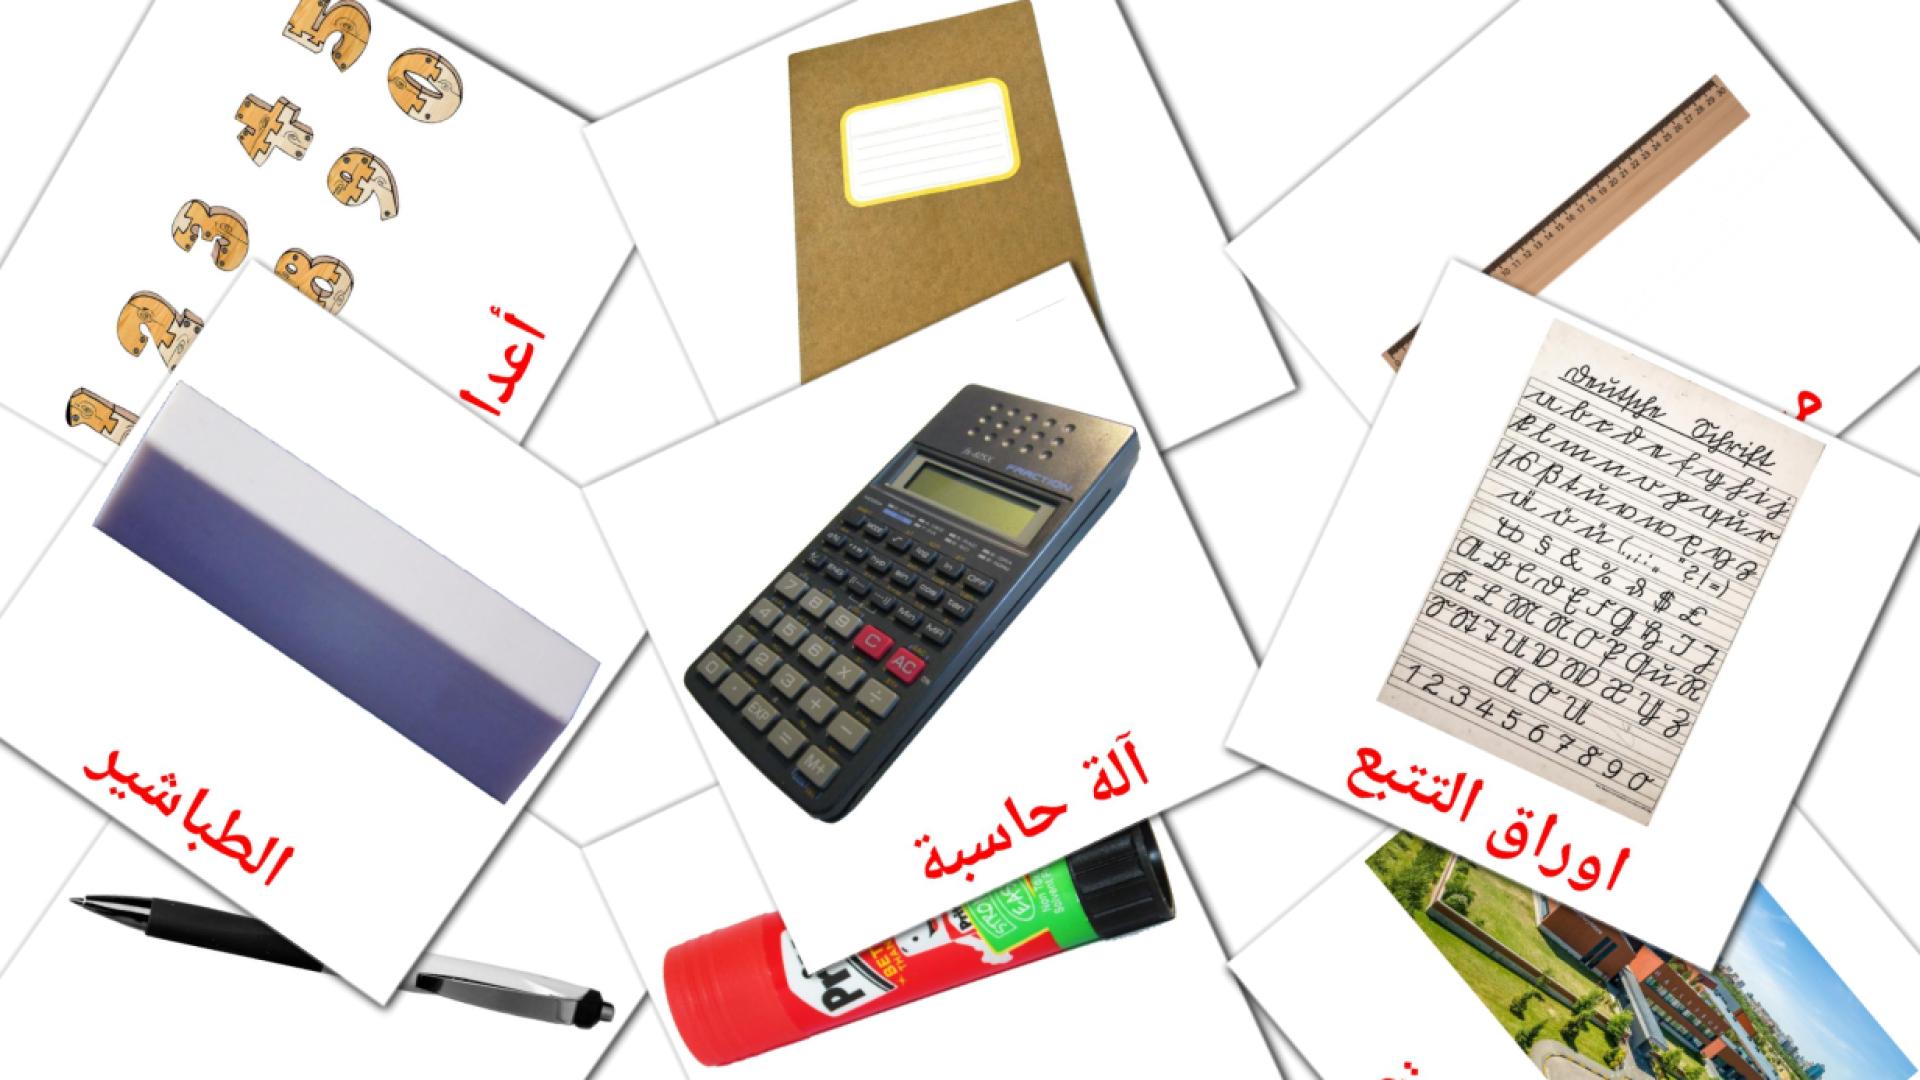 Classroom objects - arabic vocabulary cards